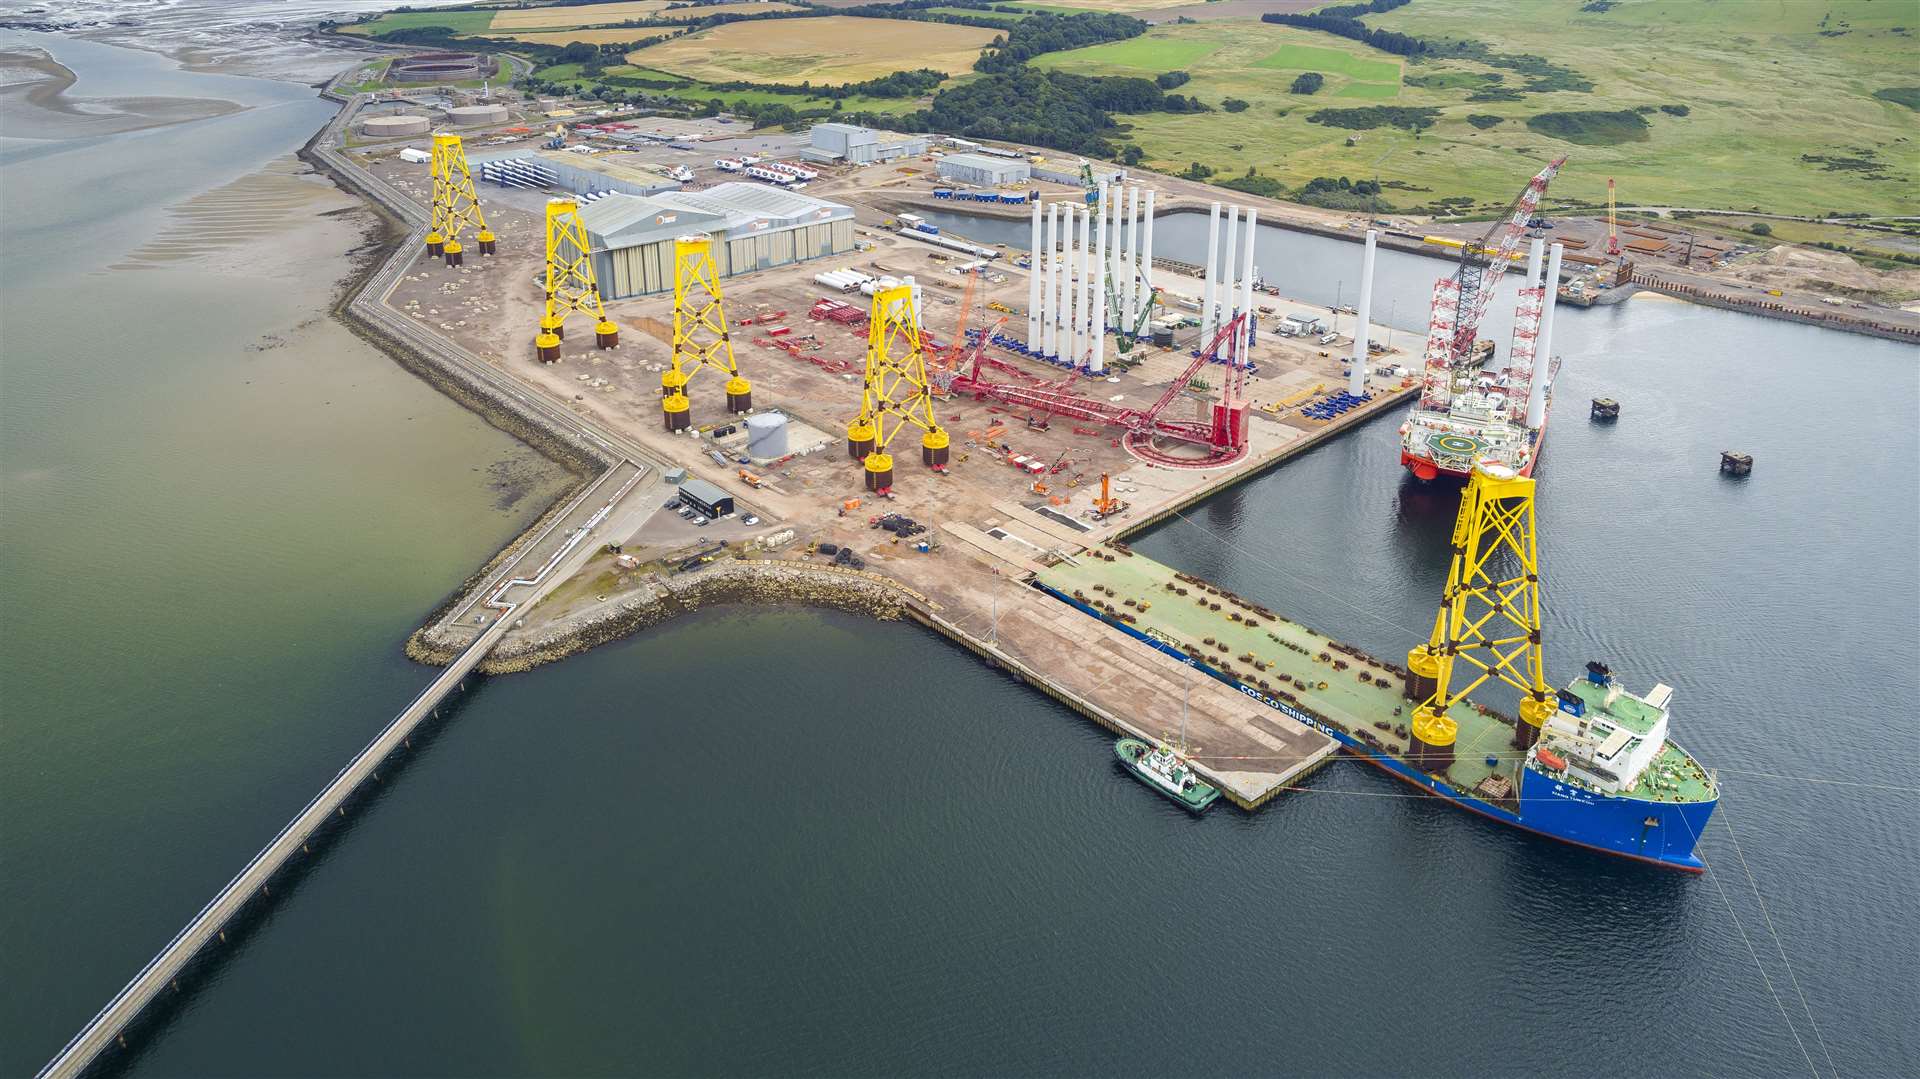 The new 'floating parliament' should be built at Nigg rather than on the Clyde, to avoid delays. Xiang Yan Kou, Port of Nigg, Nigg, Highland, Scotland, UK, Sunday 15, August, 2021.....Image by: Malcolm McCurrach | © Malcolm McCurrach 2021 | New Wave Images UK | All rights reserved. | pictures@nwimages.co.uk | www.nwimages.co.uk | 07743 719366.